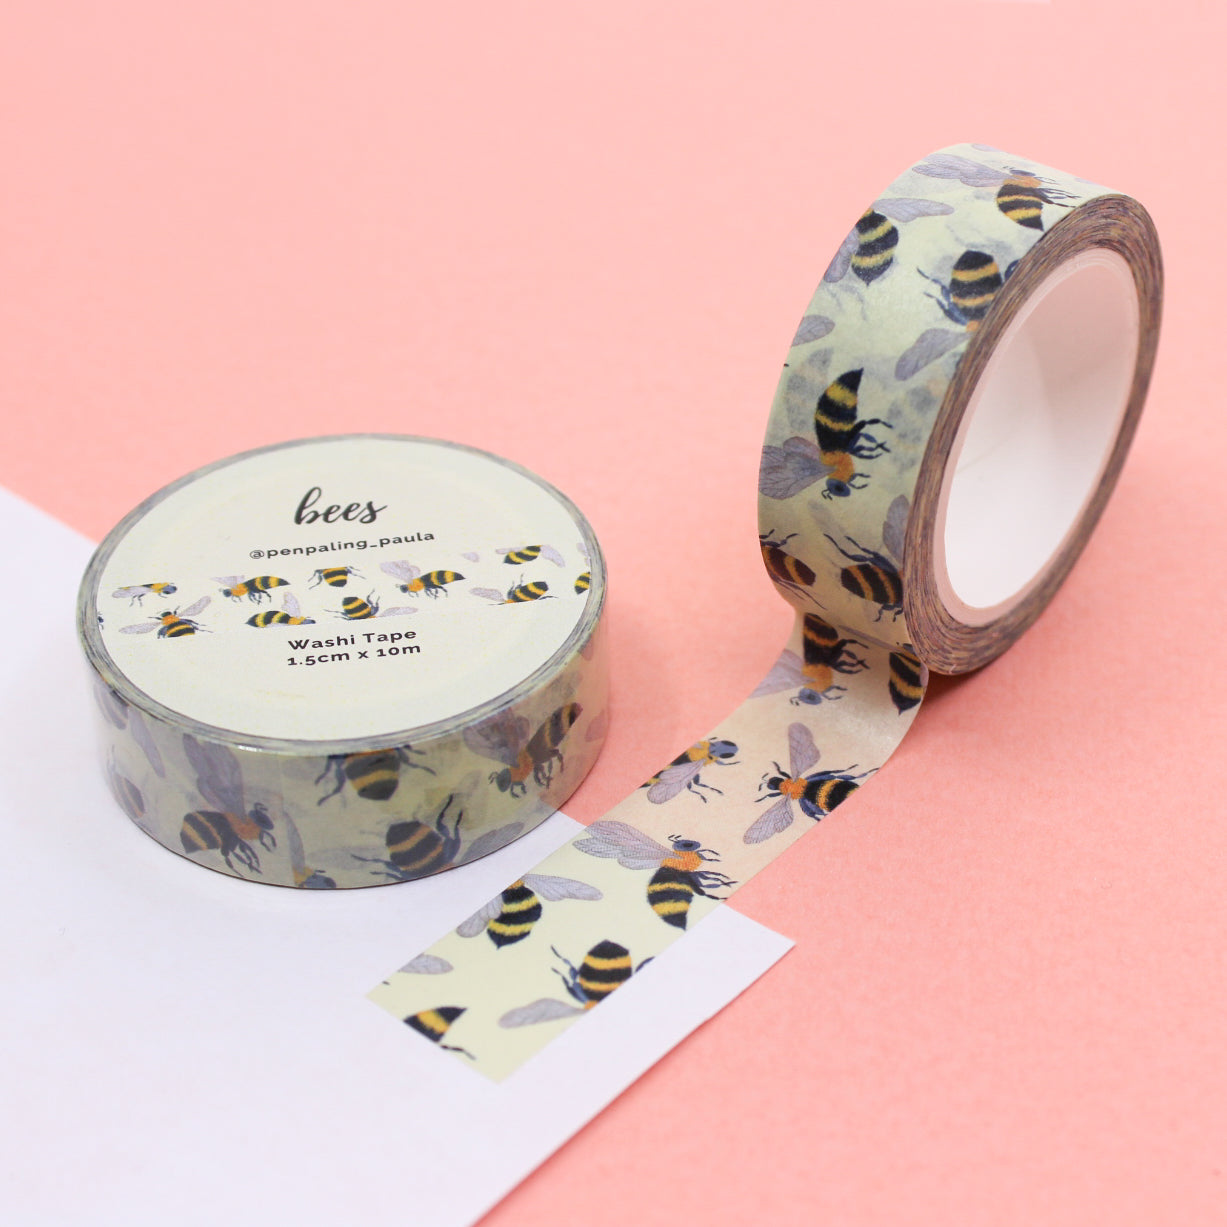 Sweet Spring Yellow Bee Washi Tape: Adorable washi tape featuring yellow bees, perfect for adding a cheerful touch to your spring-themed crafts and projects. This tape is from Penpaling Paula and sold at BBB Supplies Craft Shop. 